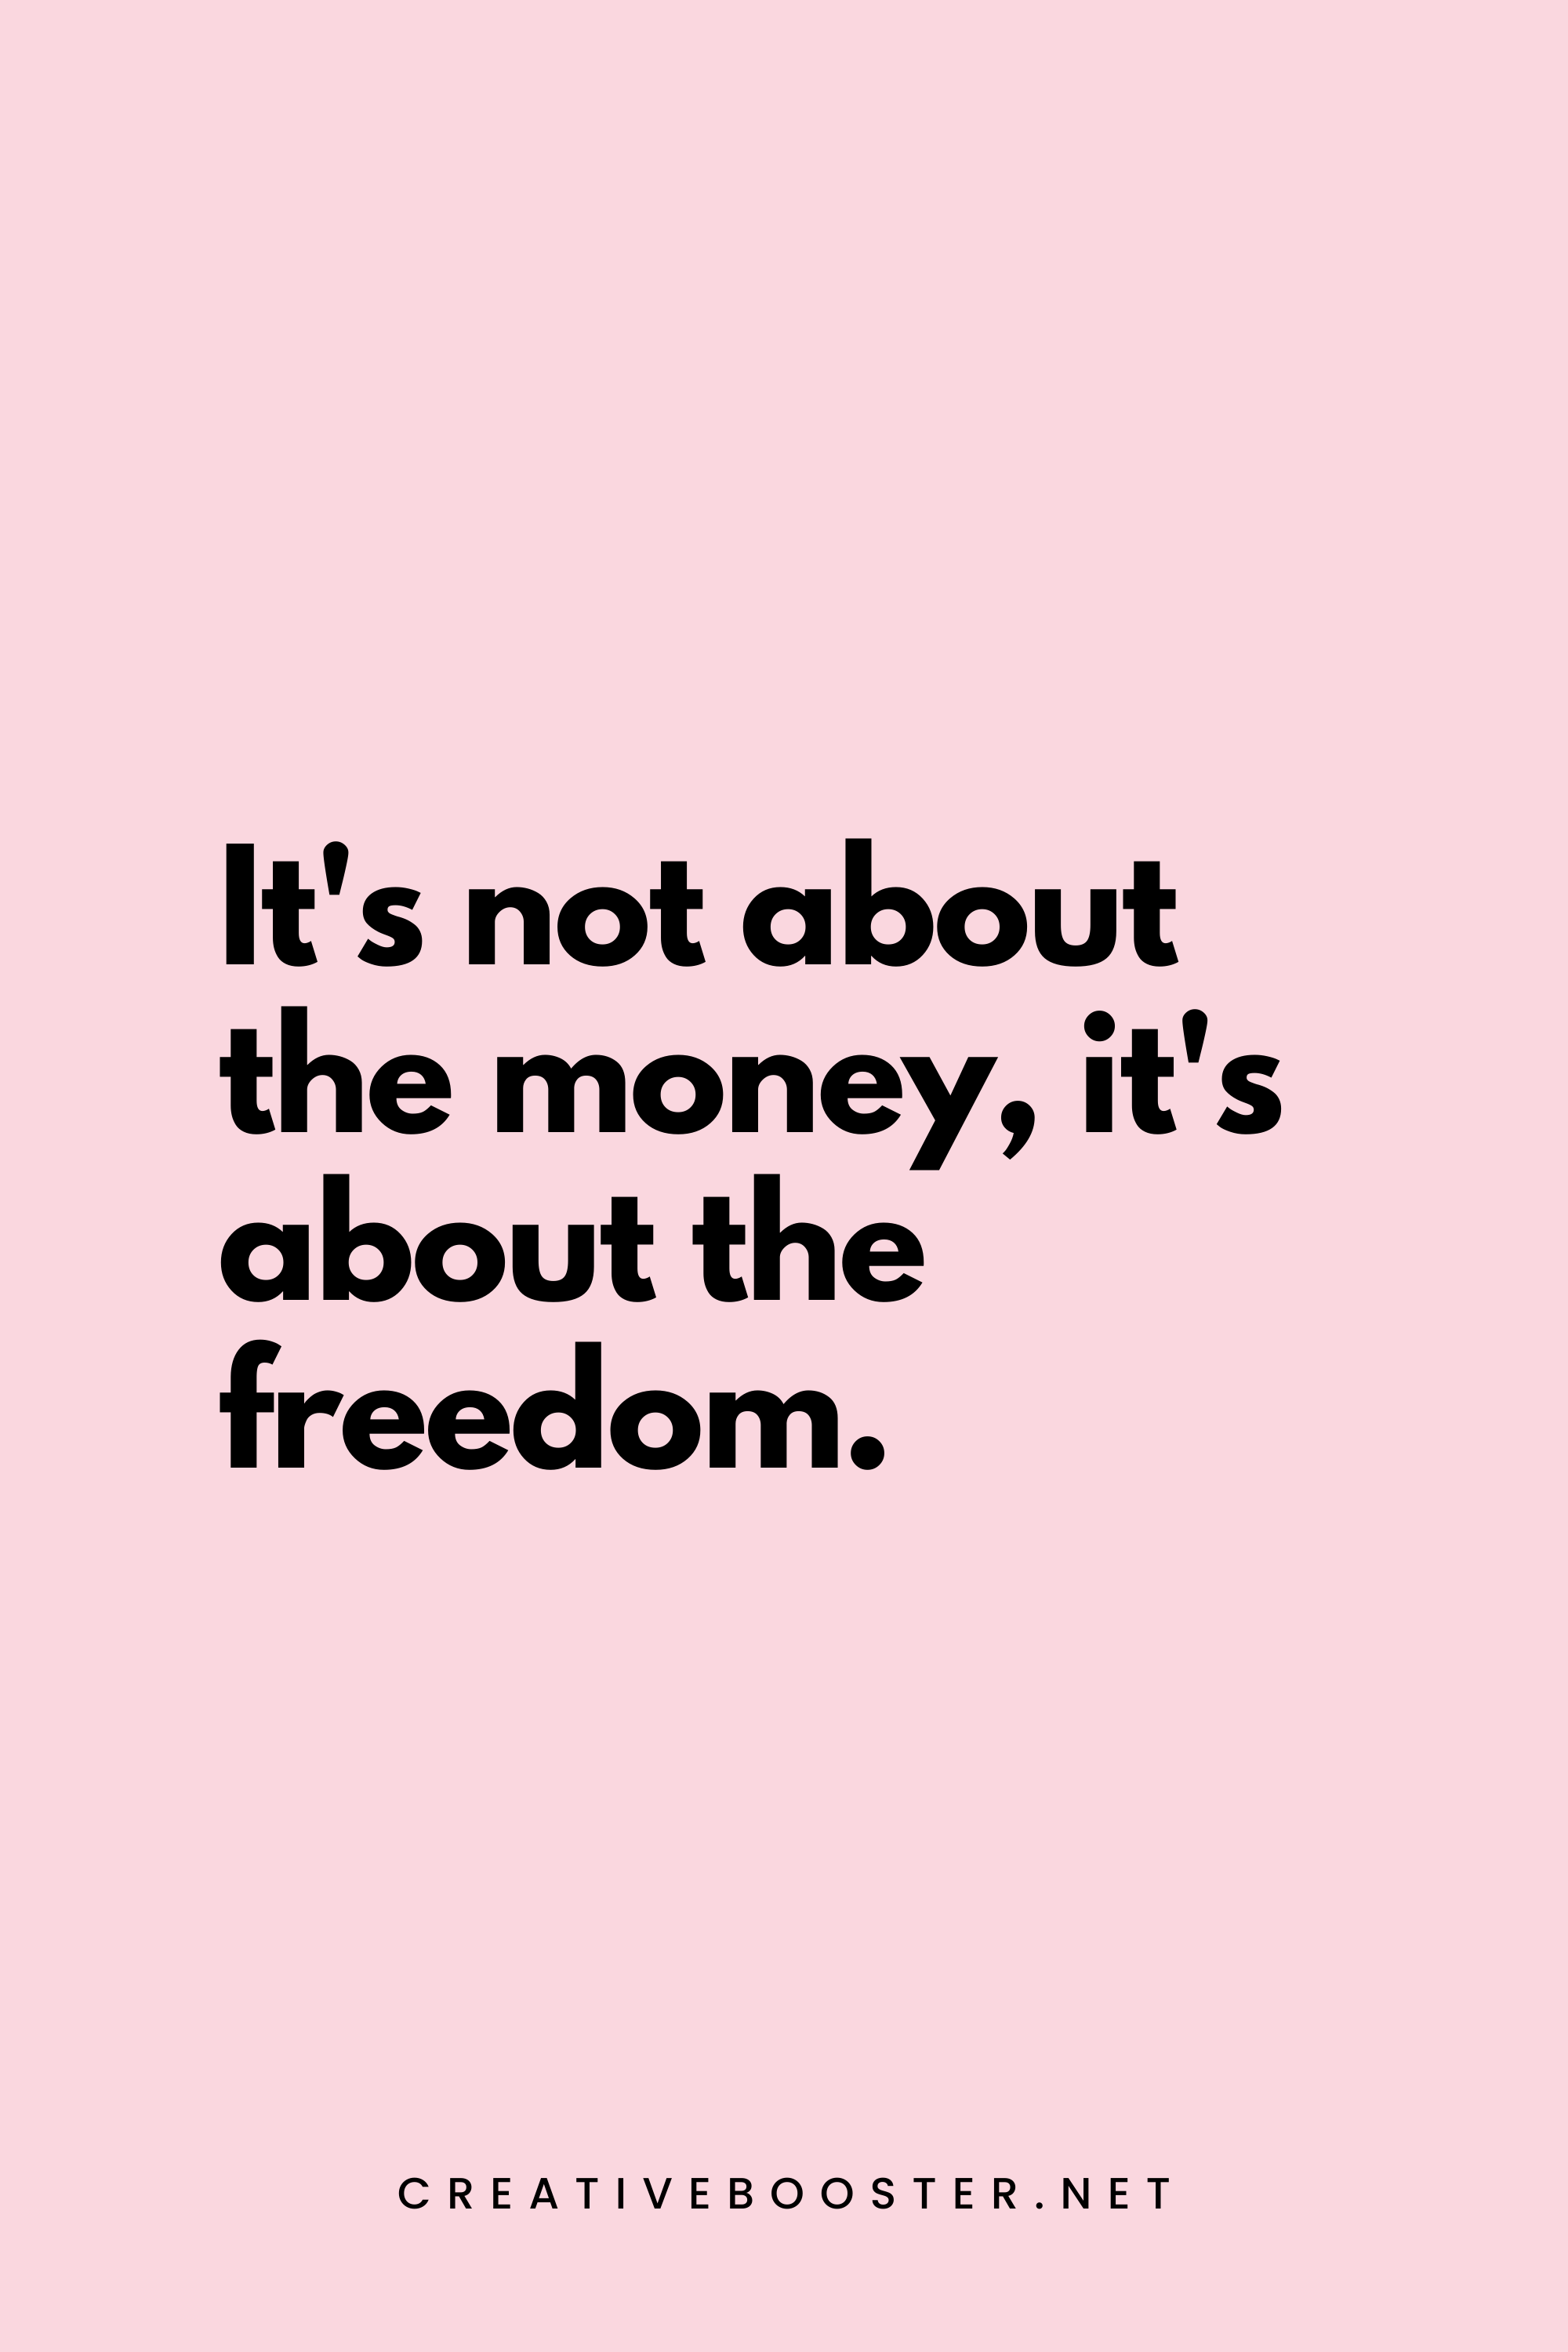 2. It's not about the money, it's about the freedom. - Grant Sabatier - 1. Popular Financial Freedom Quotes